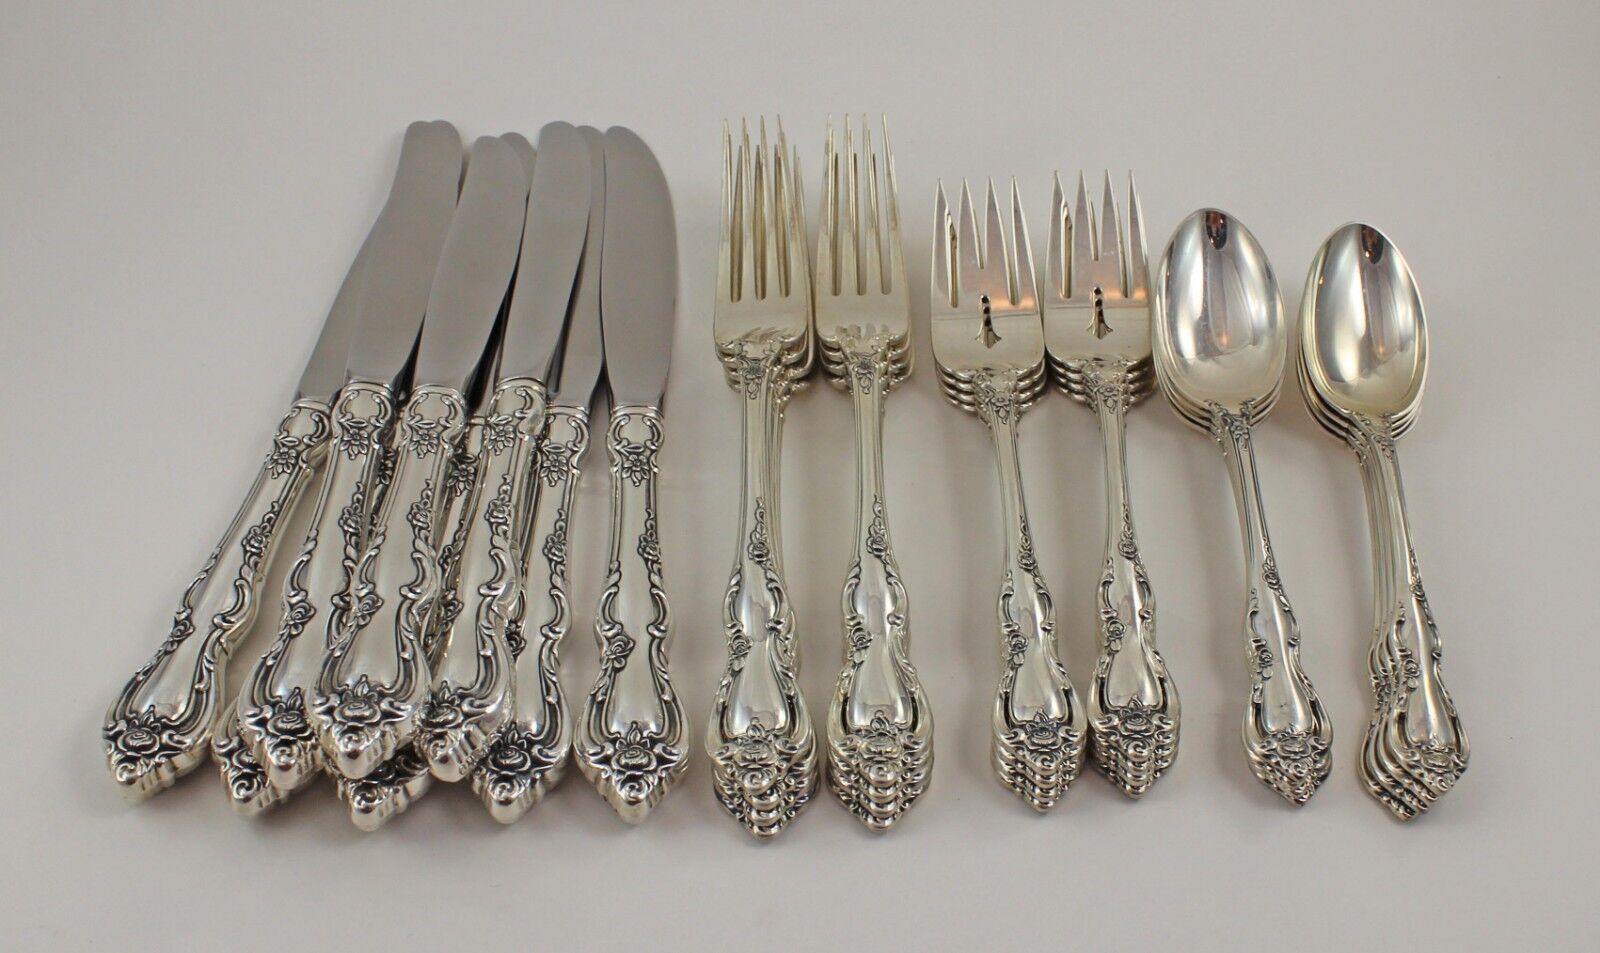 Towle Spanish Provincial Sterling Silver 8 Person Set - 32 Pieces - No Monogram 